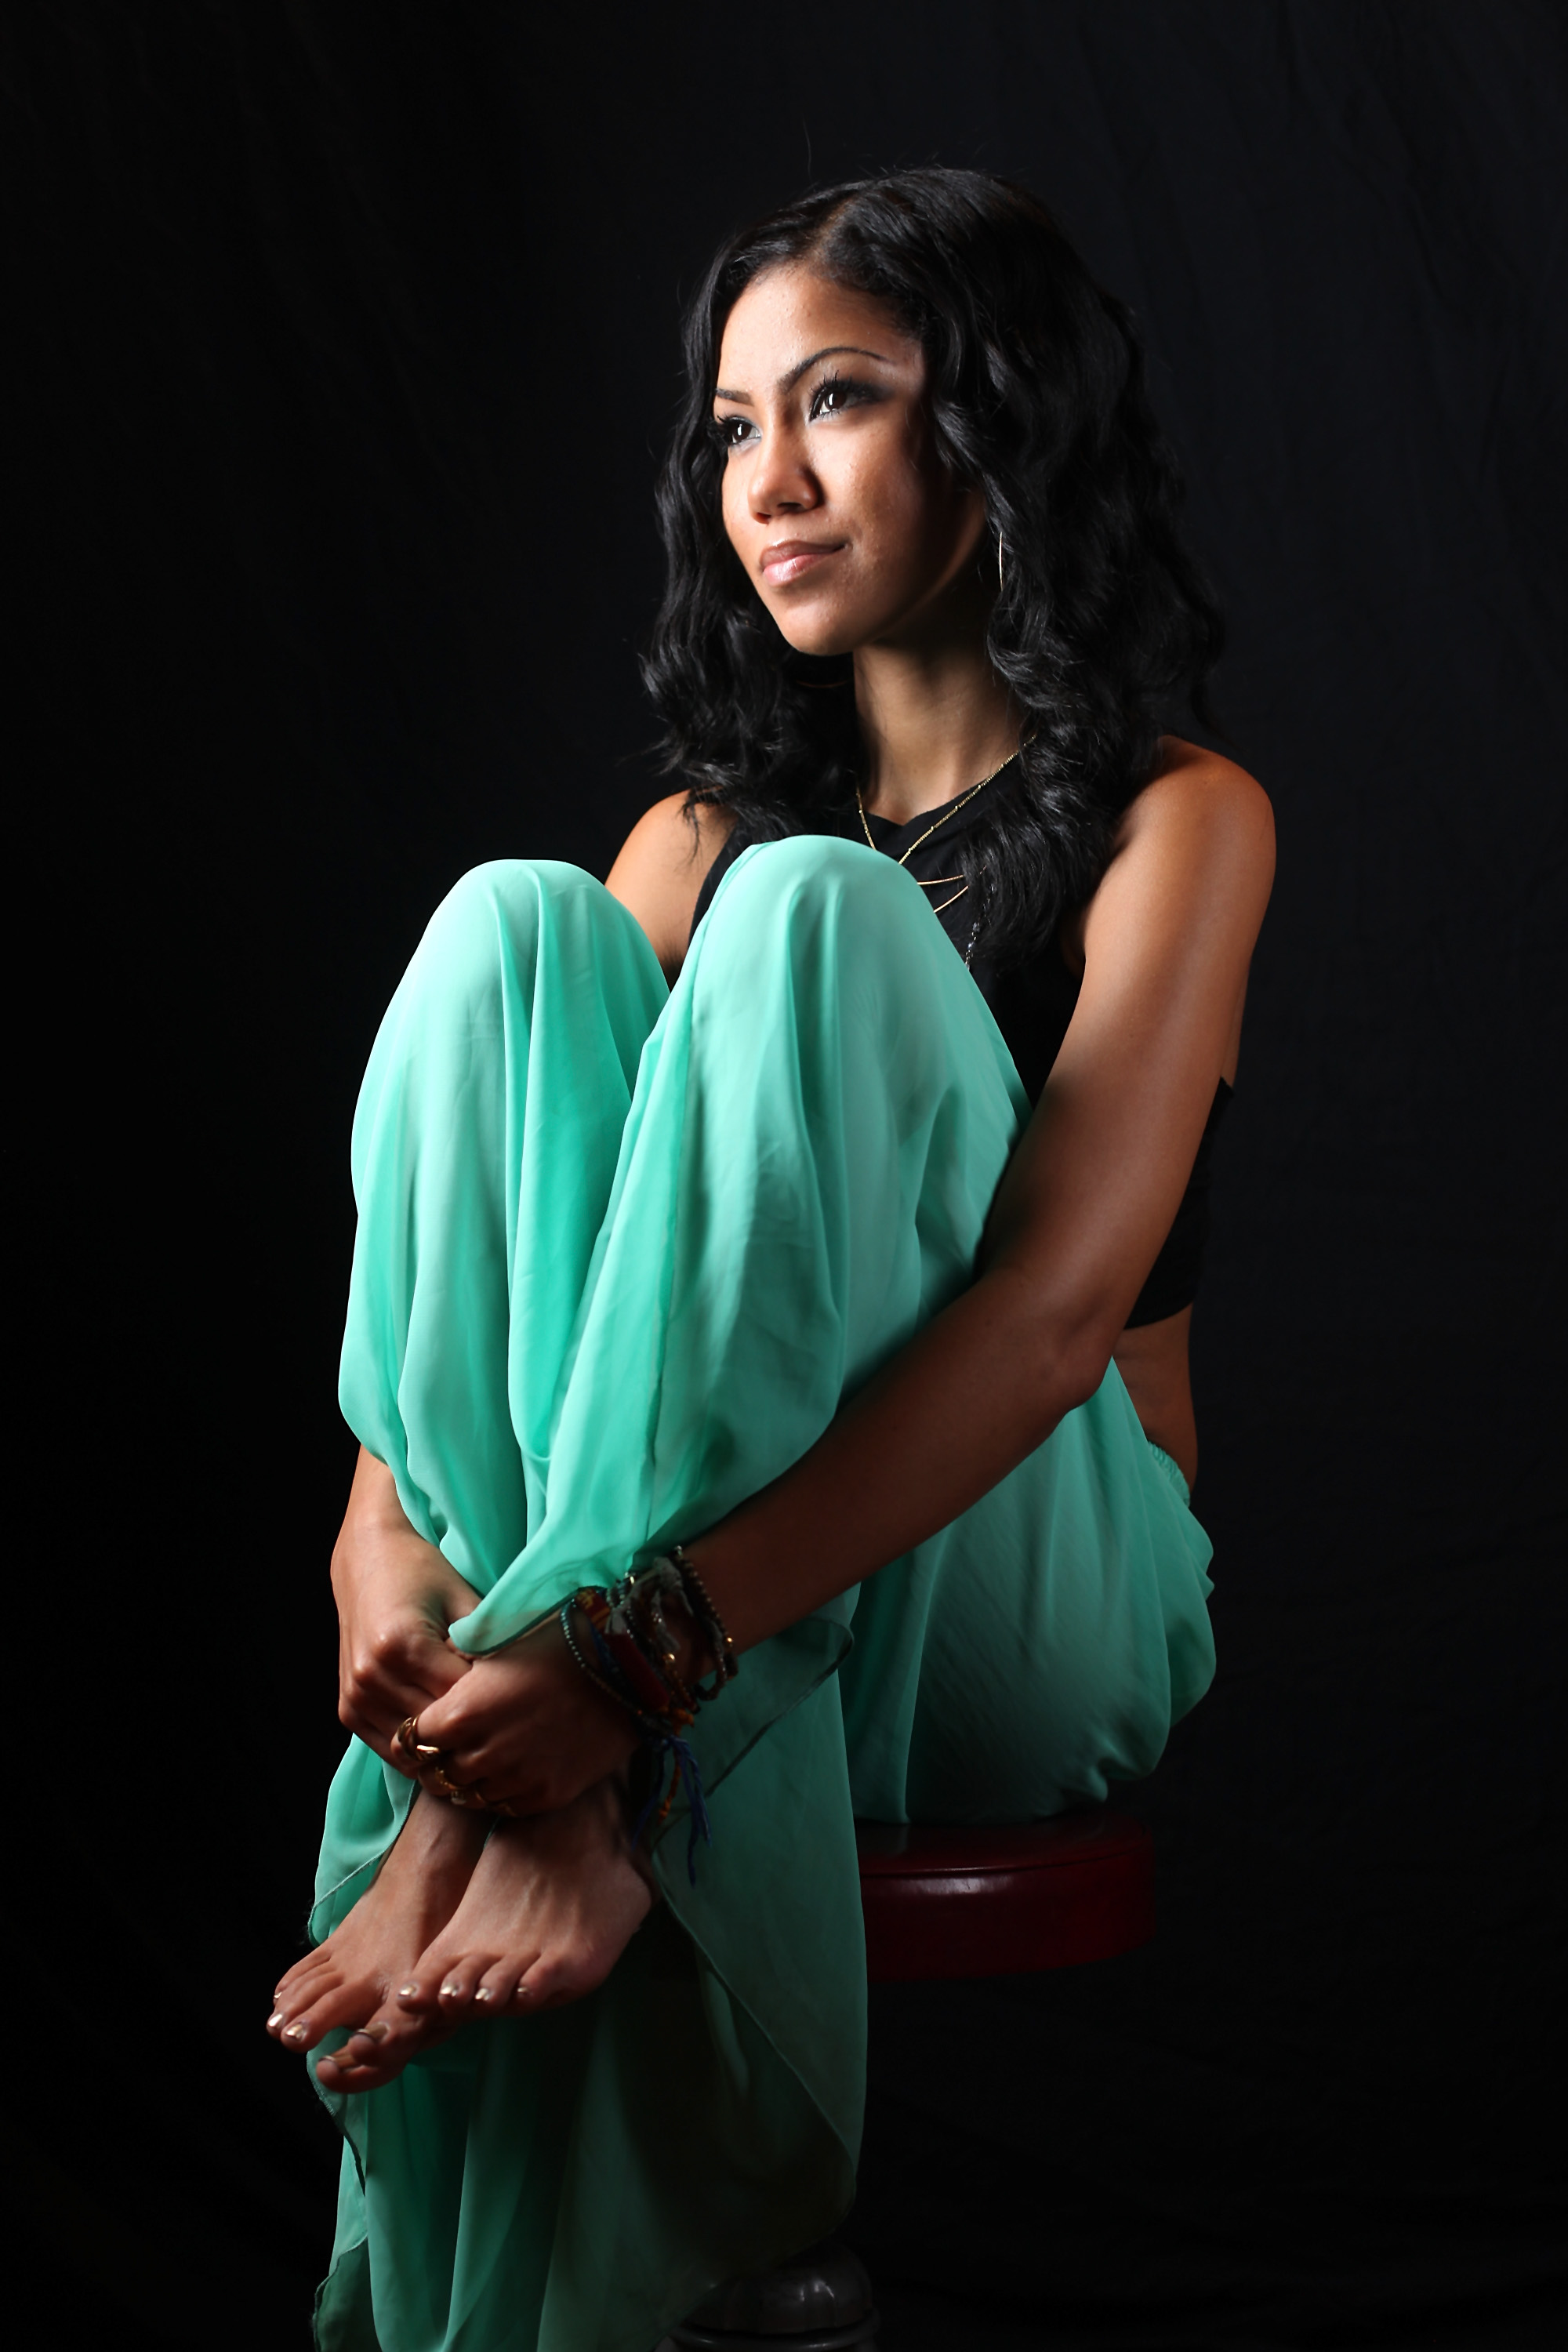 Jhené Aiko poses for a portrait backstage after her performance at 130 Hope Street on October 19, 2012, in the Brooklyn borough of New York City. | Source: Getty Images